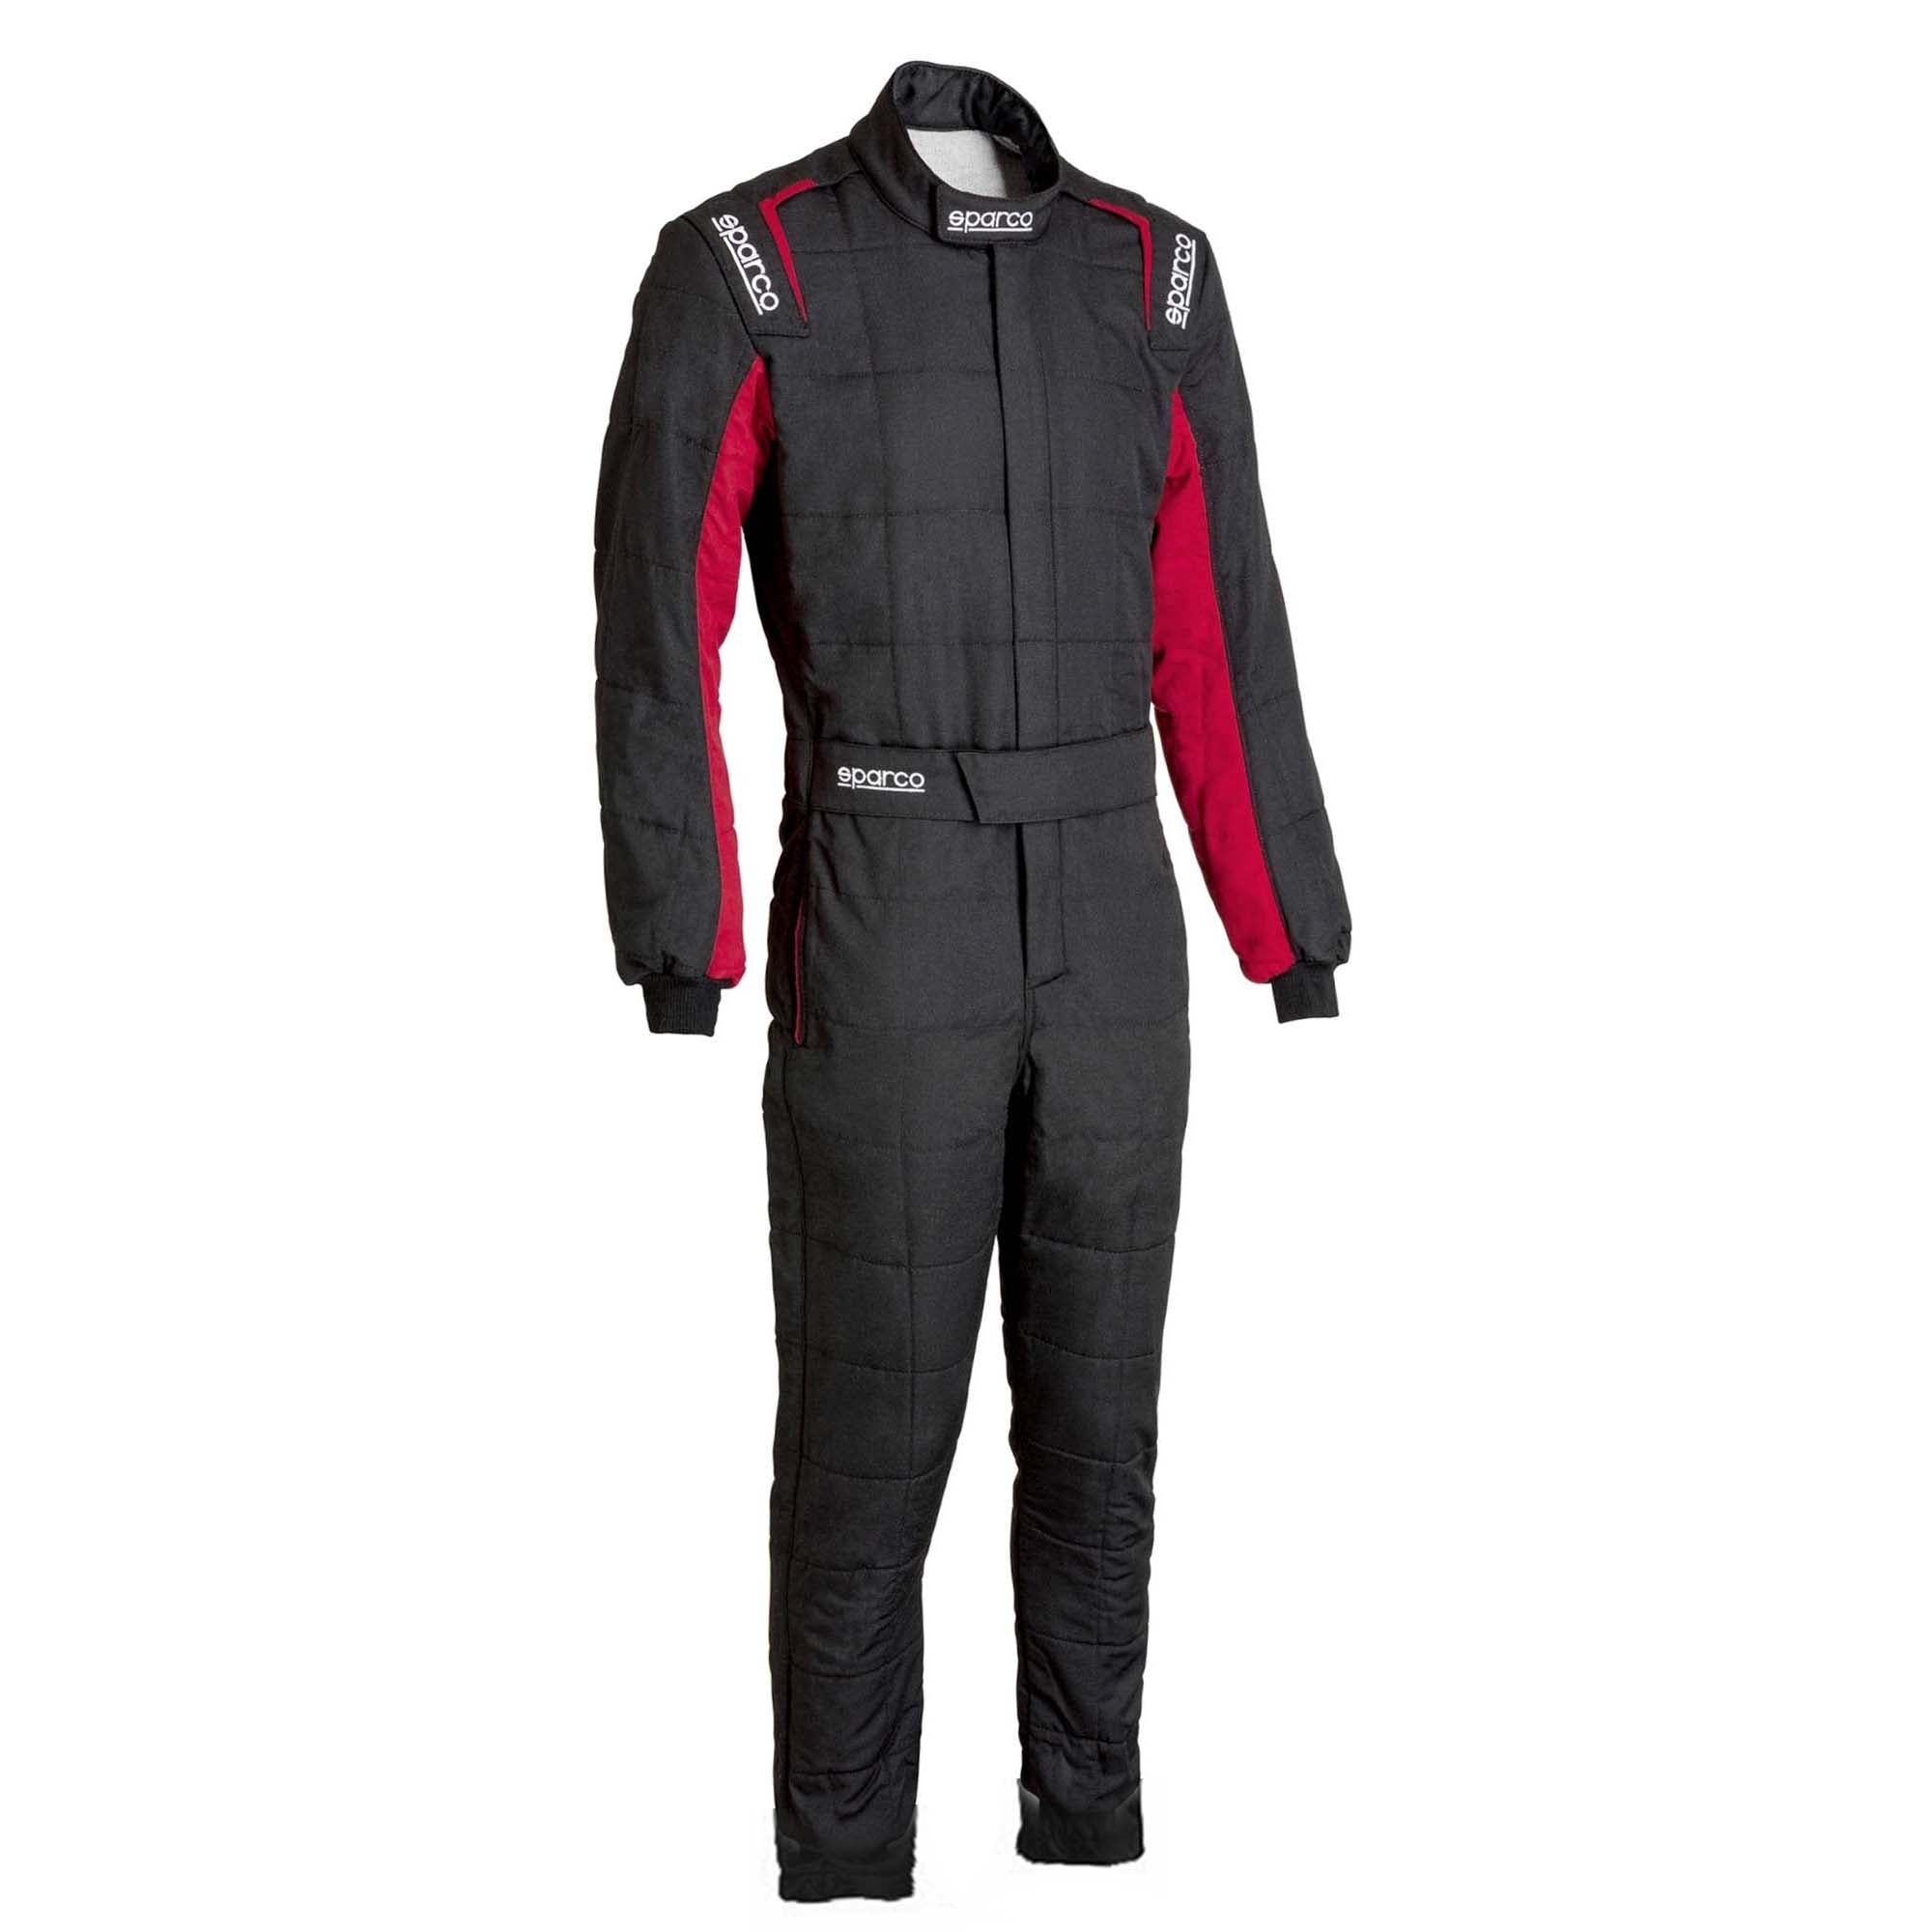 Sparco Conquest 3.0 Racing Suit - Boot Cut